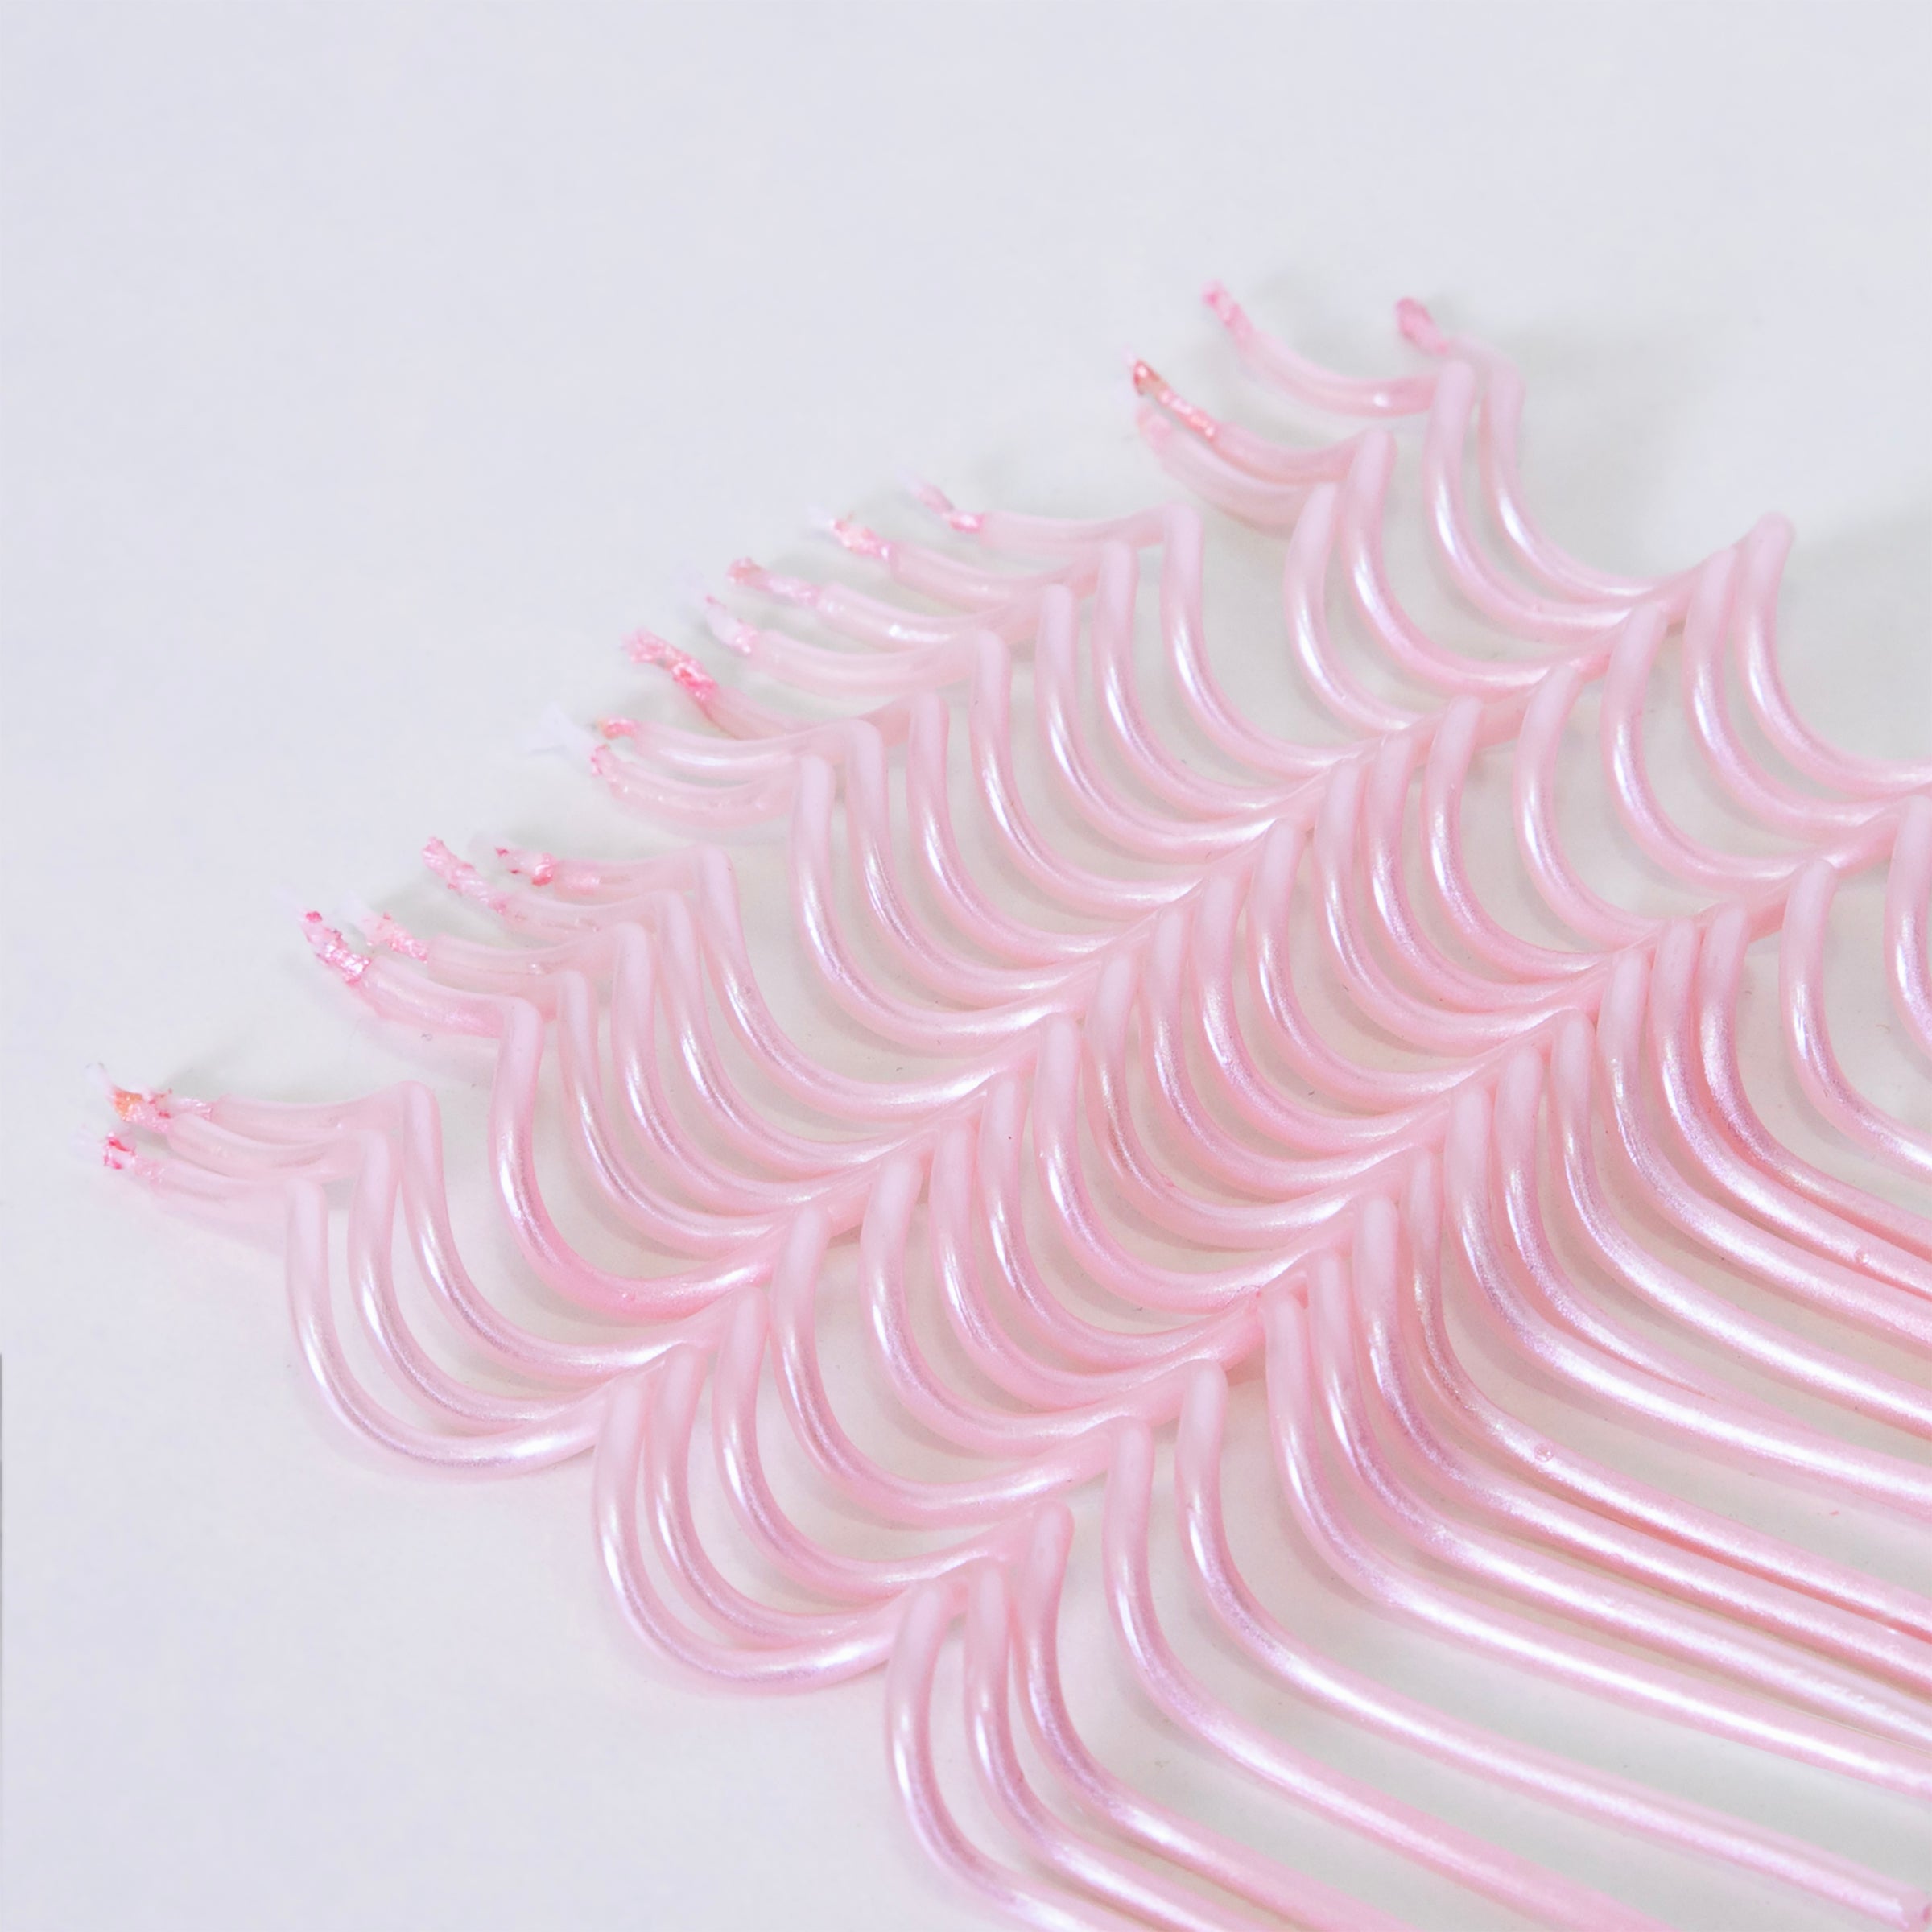 Our twisted candles, in a pretty pink shade, will look amazing at a pink themed party or as baby shower candles.